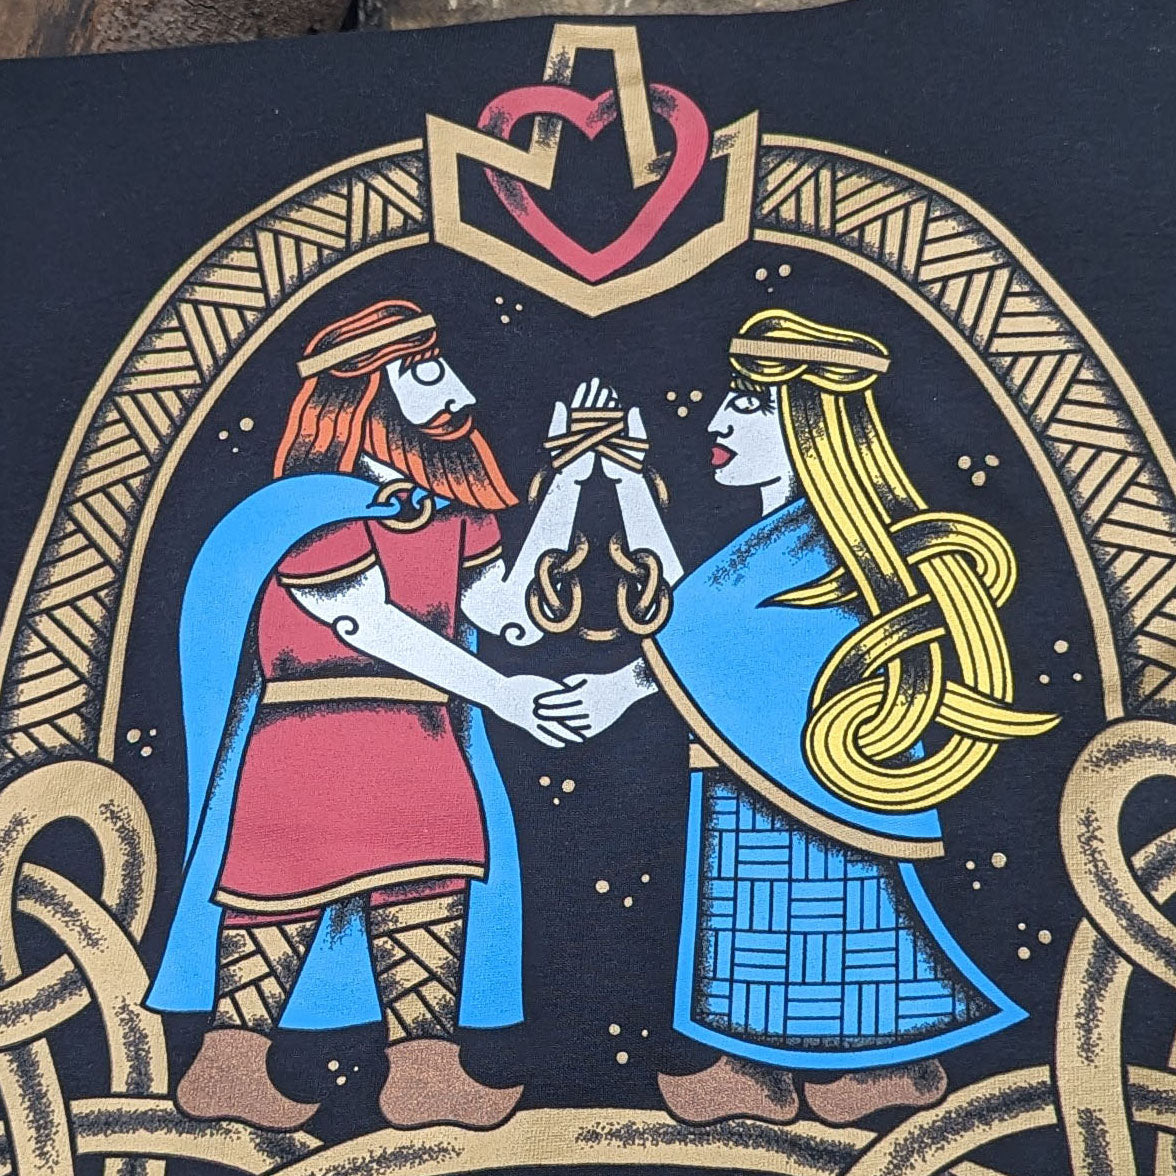 Thor and Sif Tee (Limited Edition)